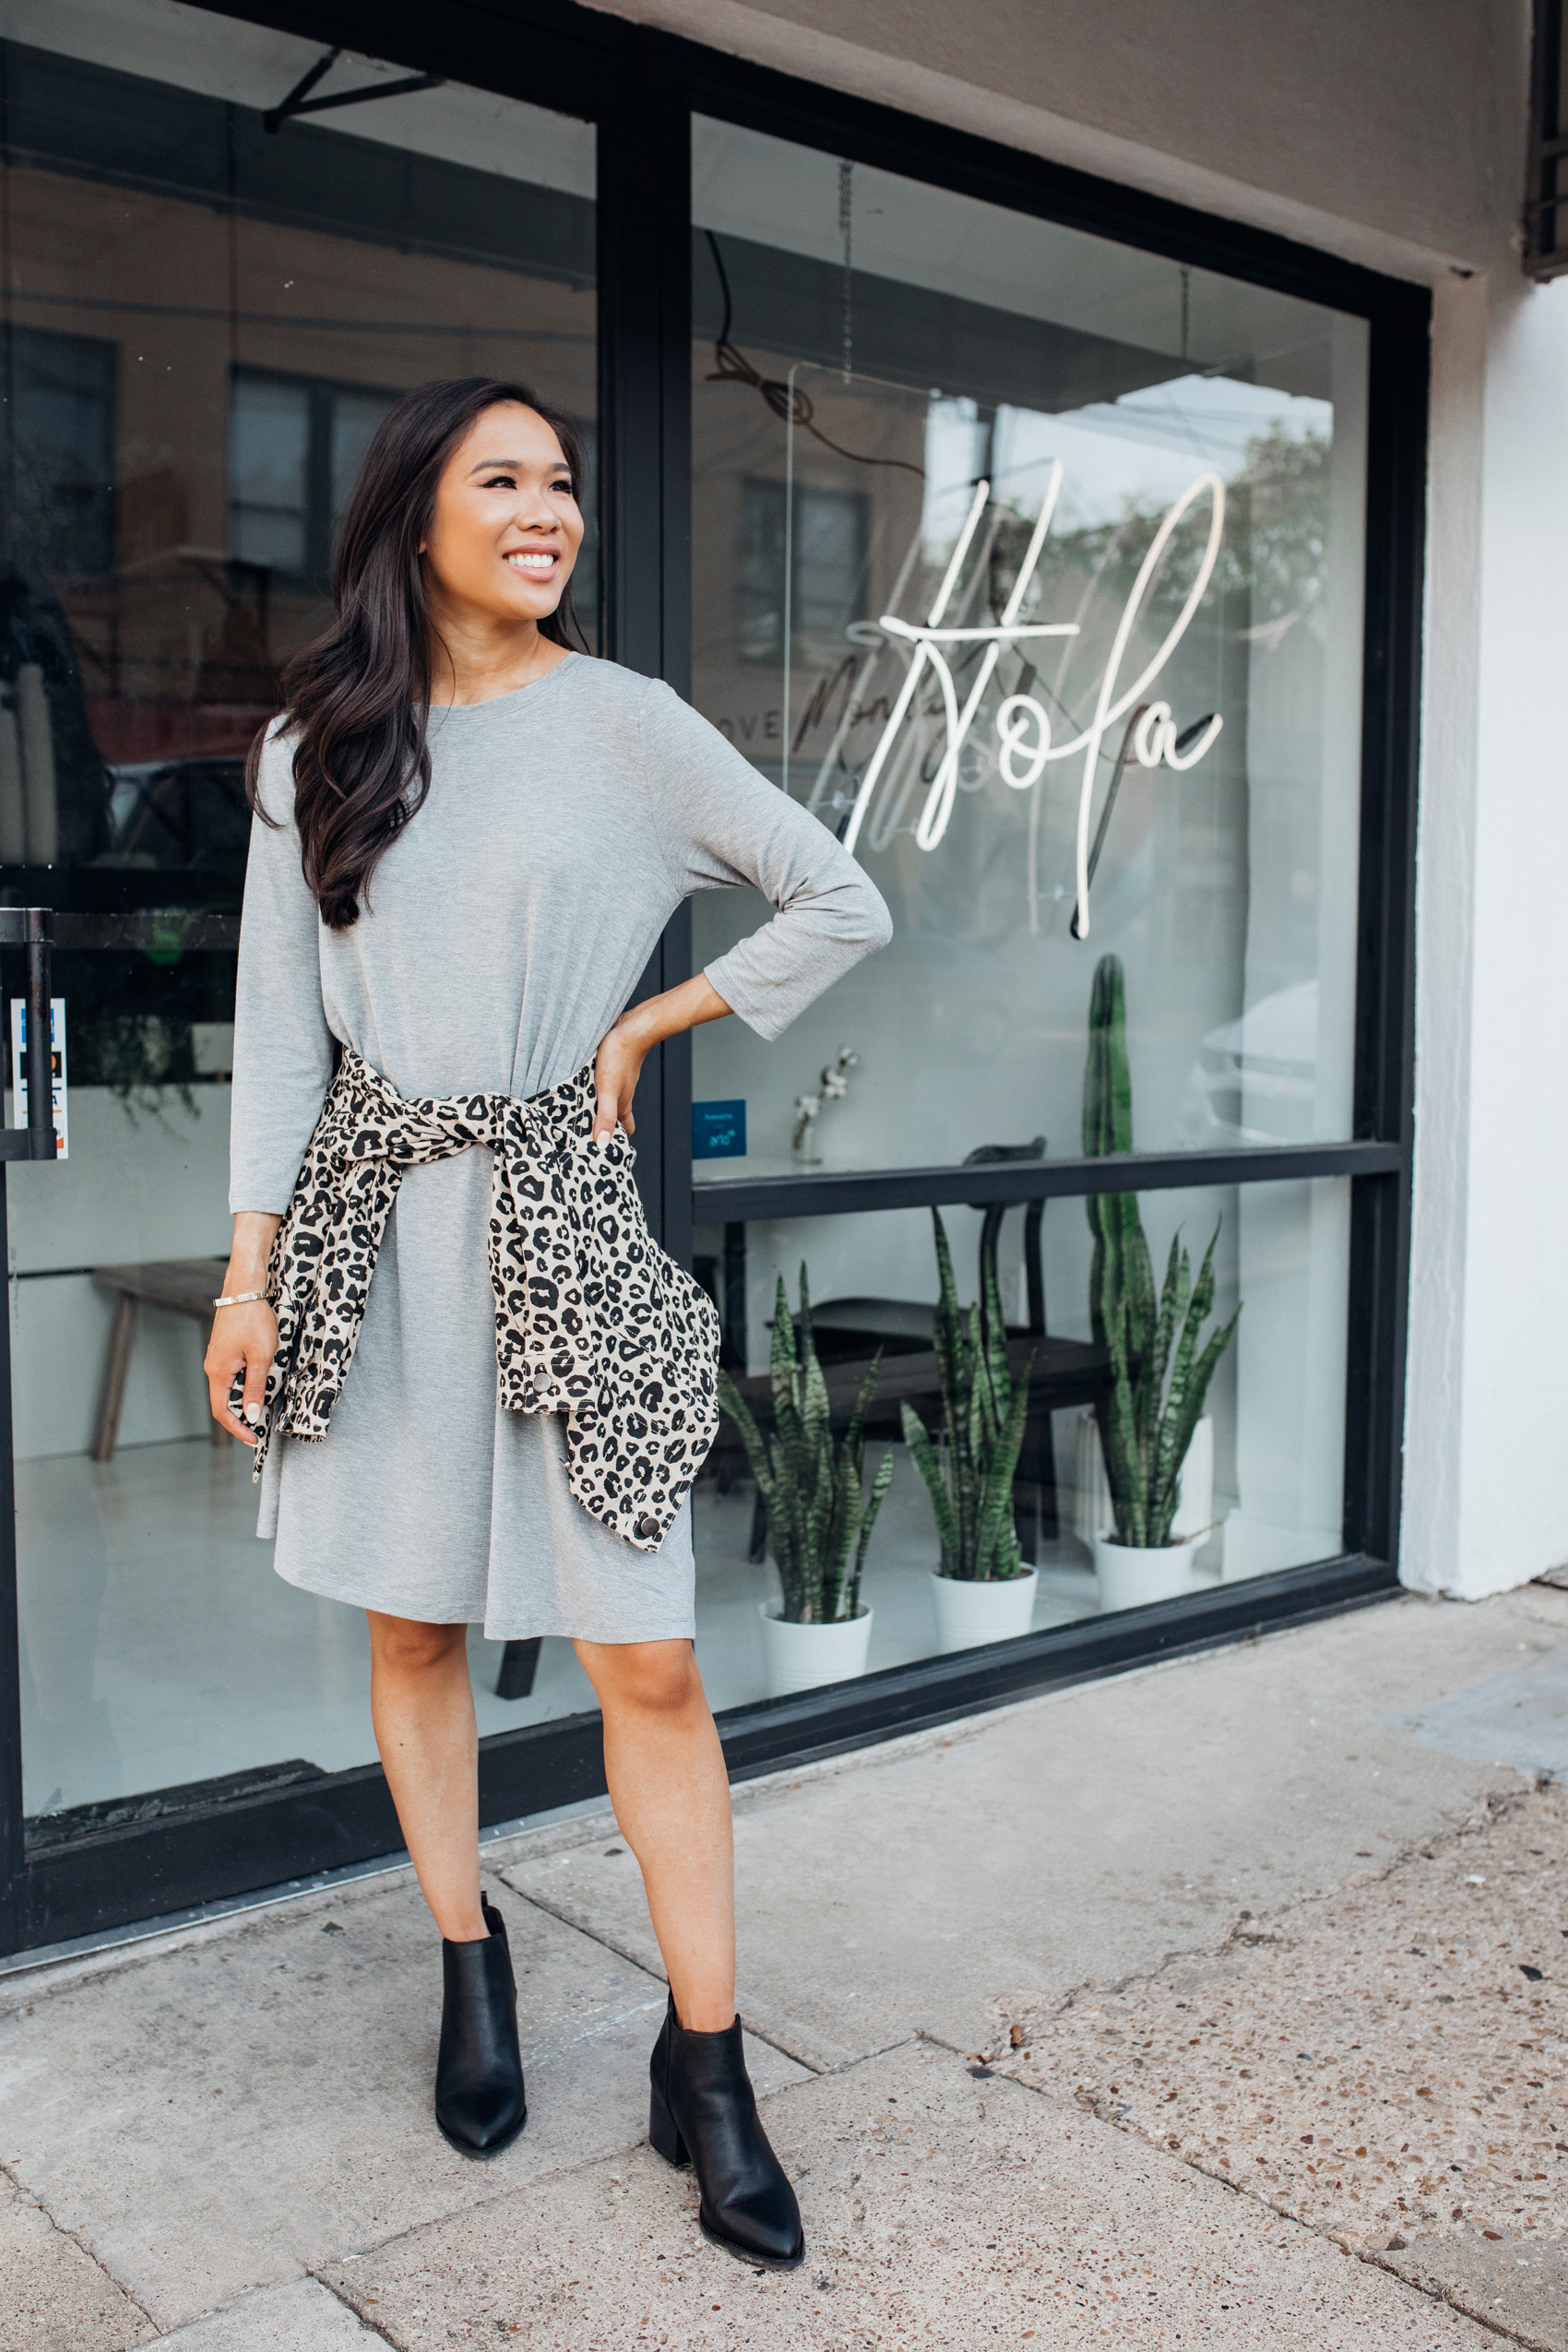 Blogger Hoang-Kim shares affordable fall fashion with Walmart wearing a gray shirt dress, leopard jacket and black booties for a fall outfit